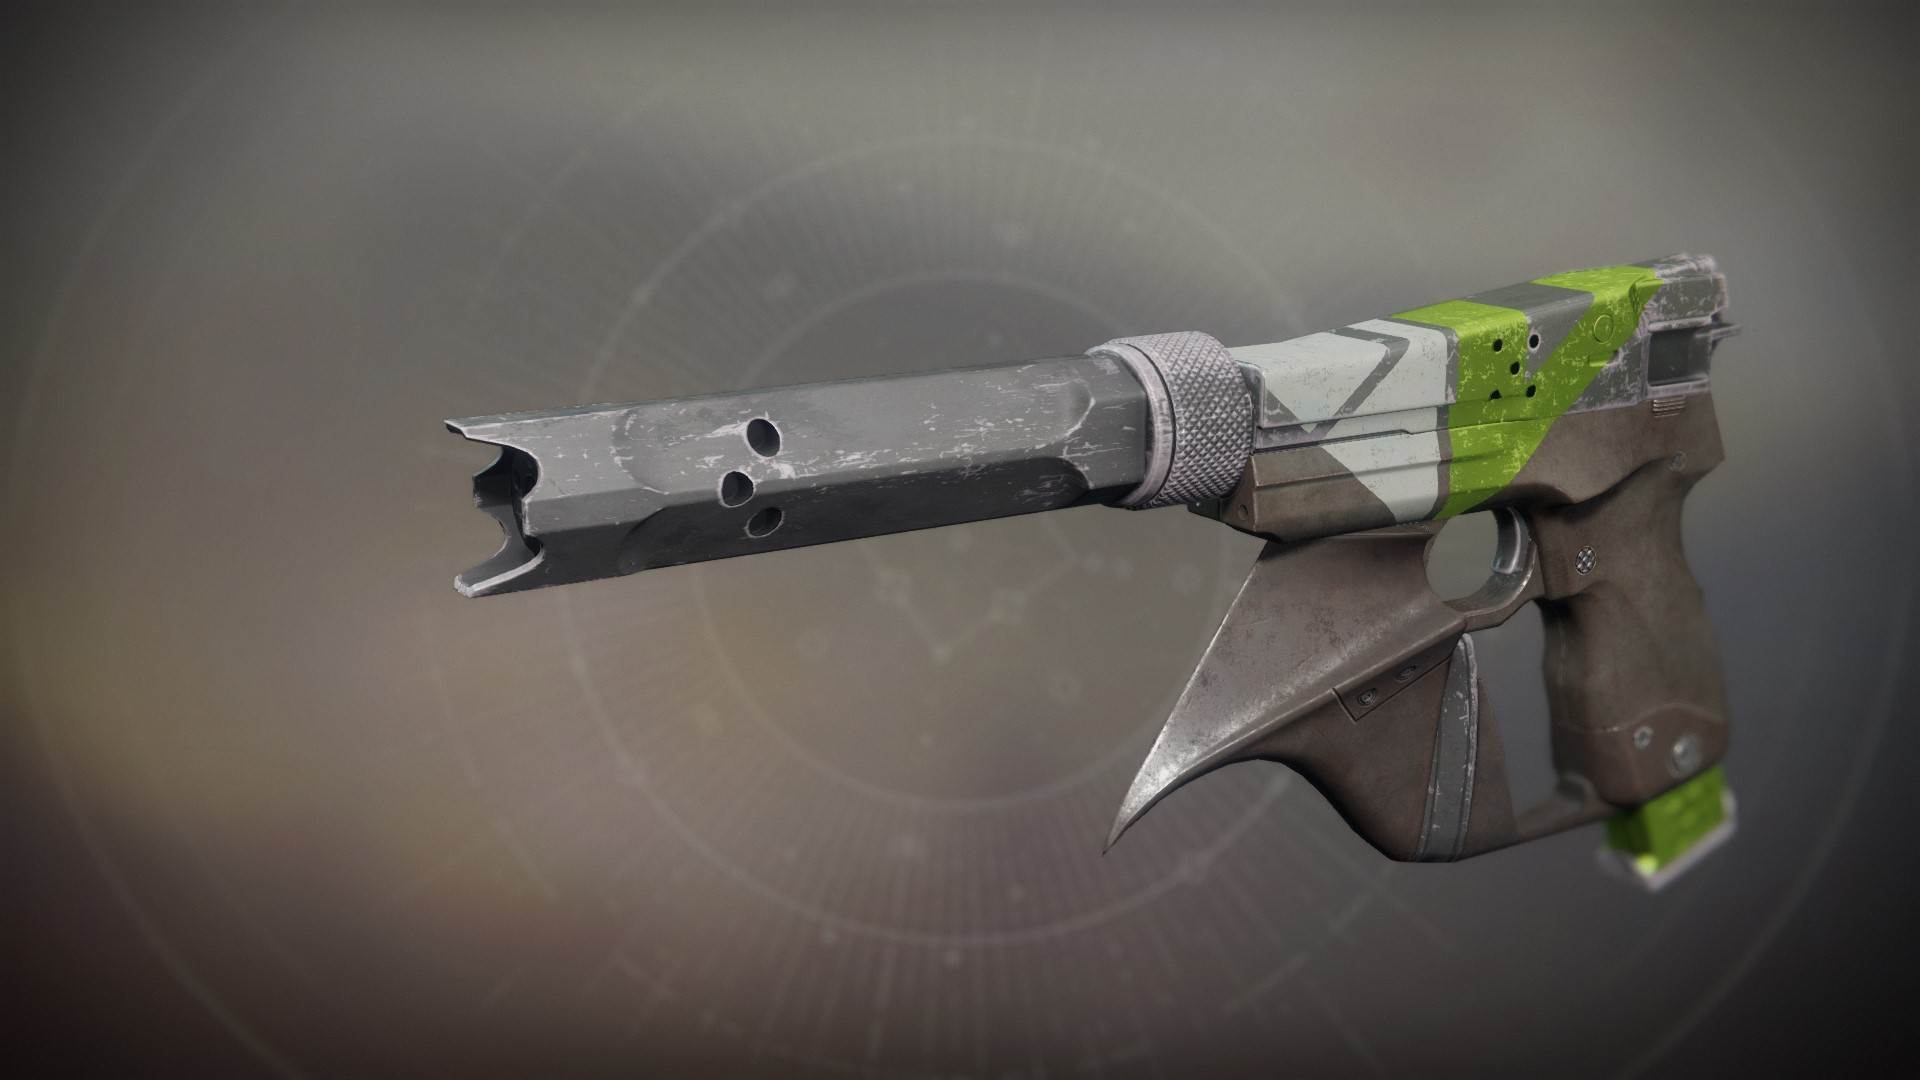 An in-game render of the Urchin-3si.